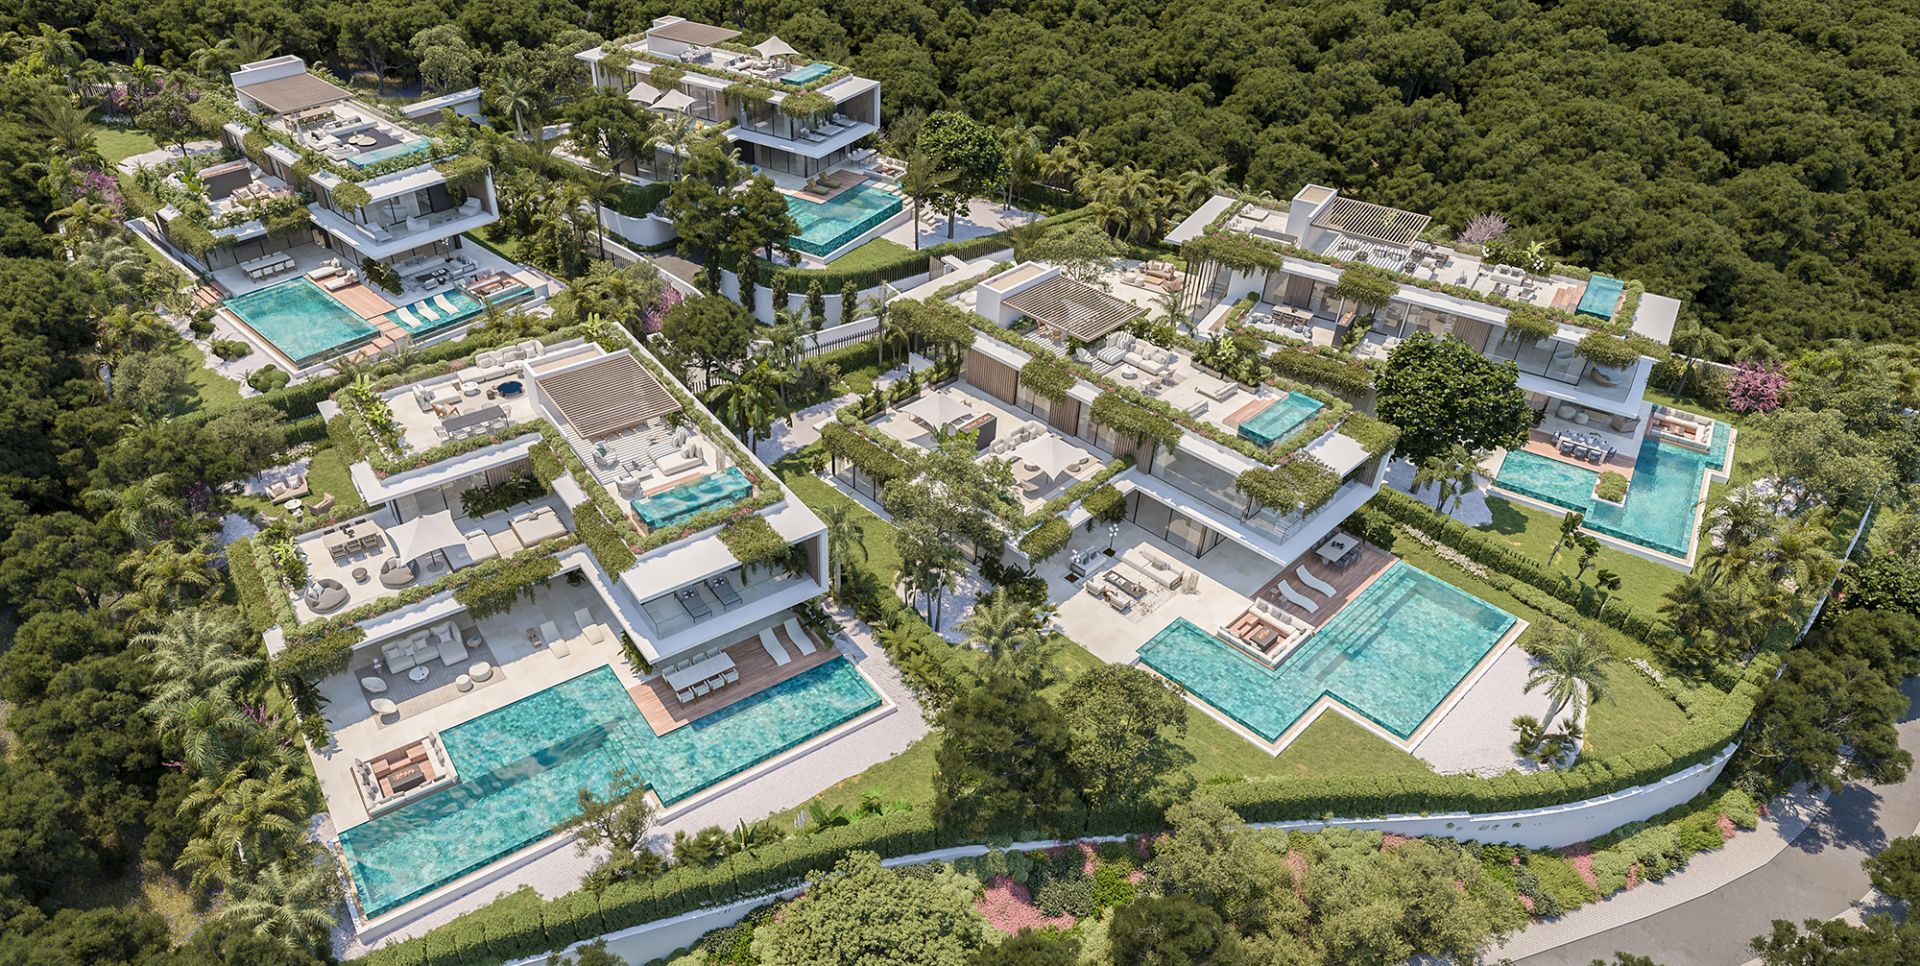 The Collection Camojan - A luxury project of only 5 villas in a gated community | Engel & Völkers Marbella